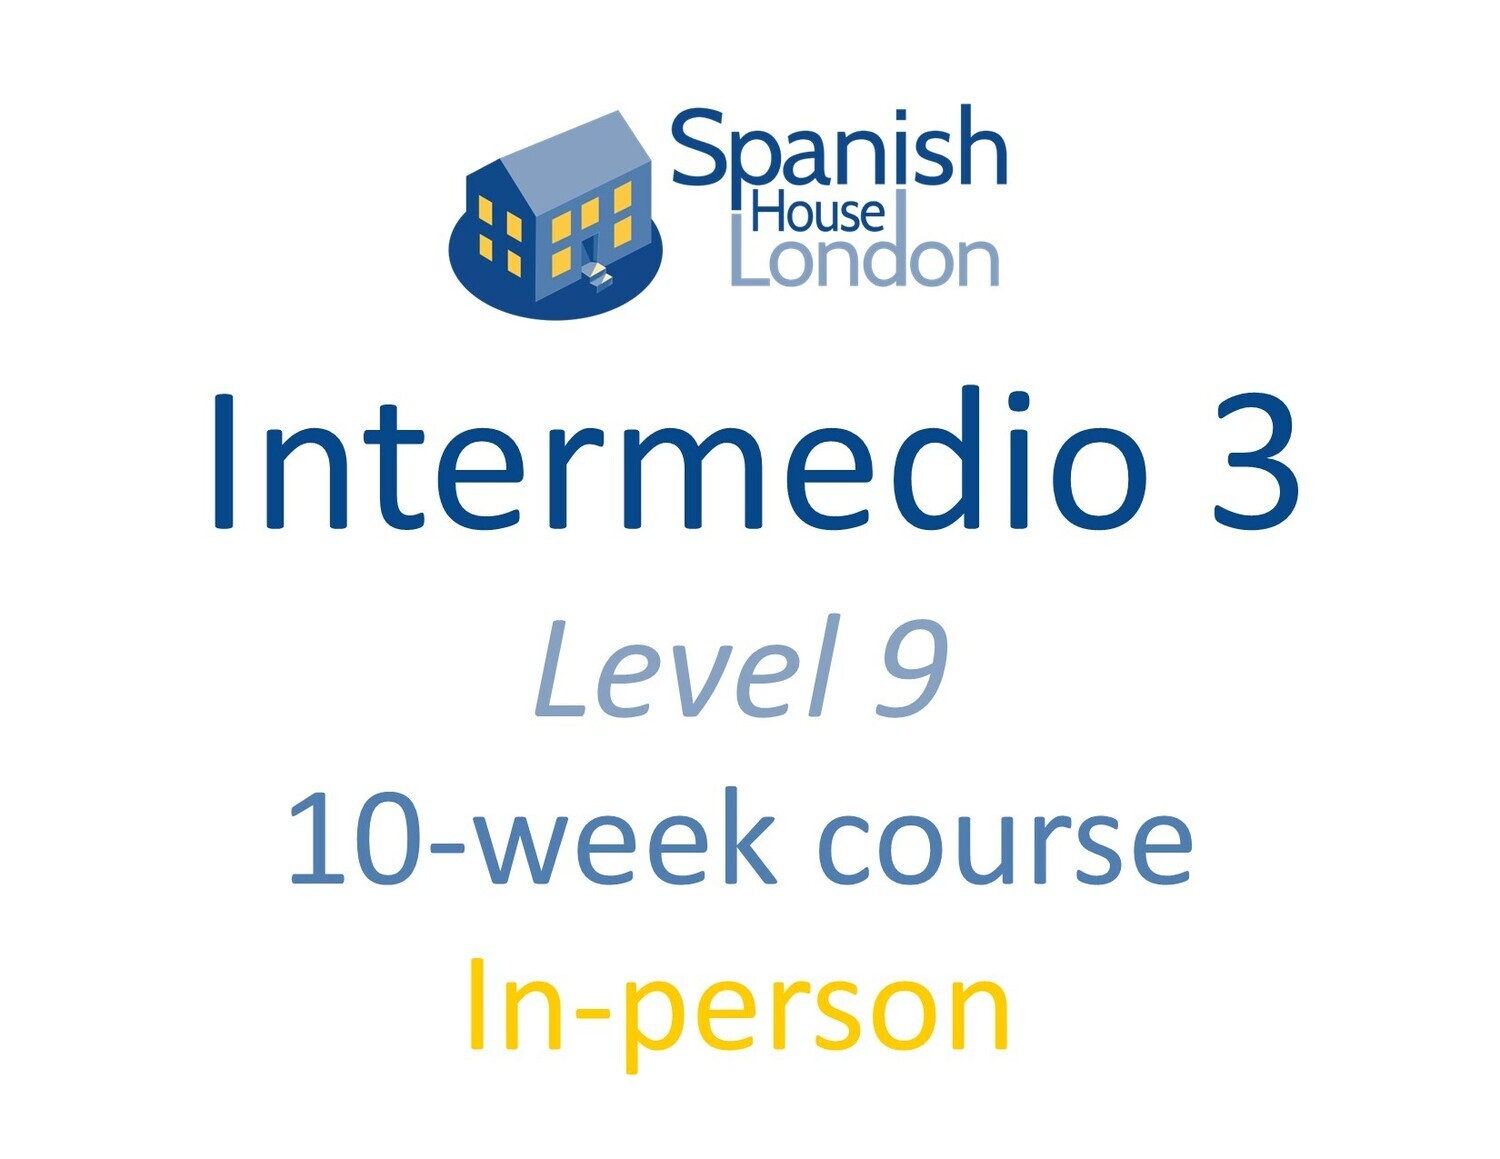 Intermedio 3 Course starting on 15th September at 7.30pm in Clapham North